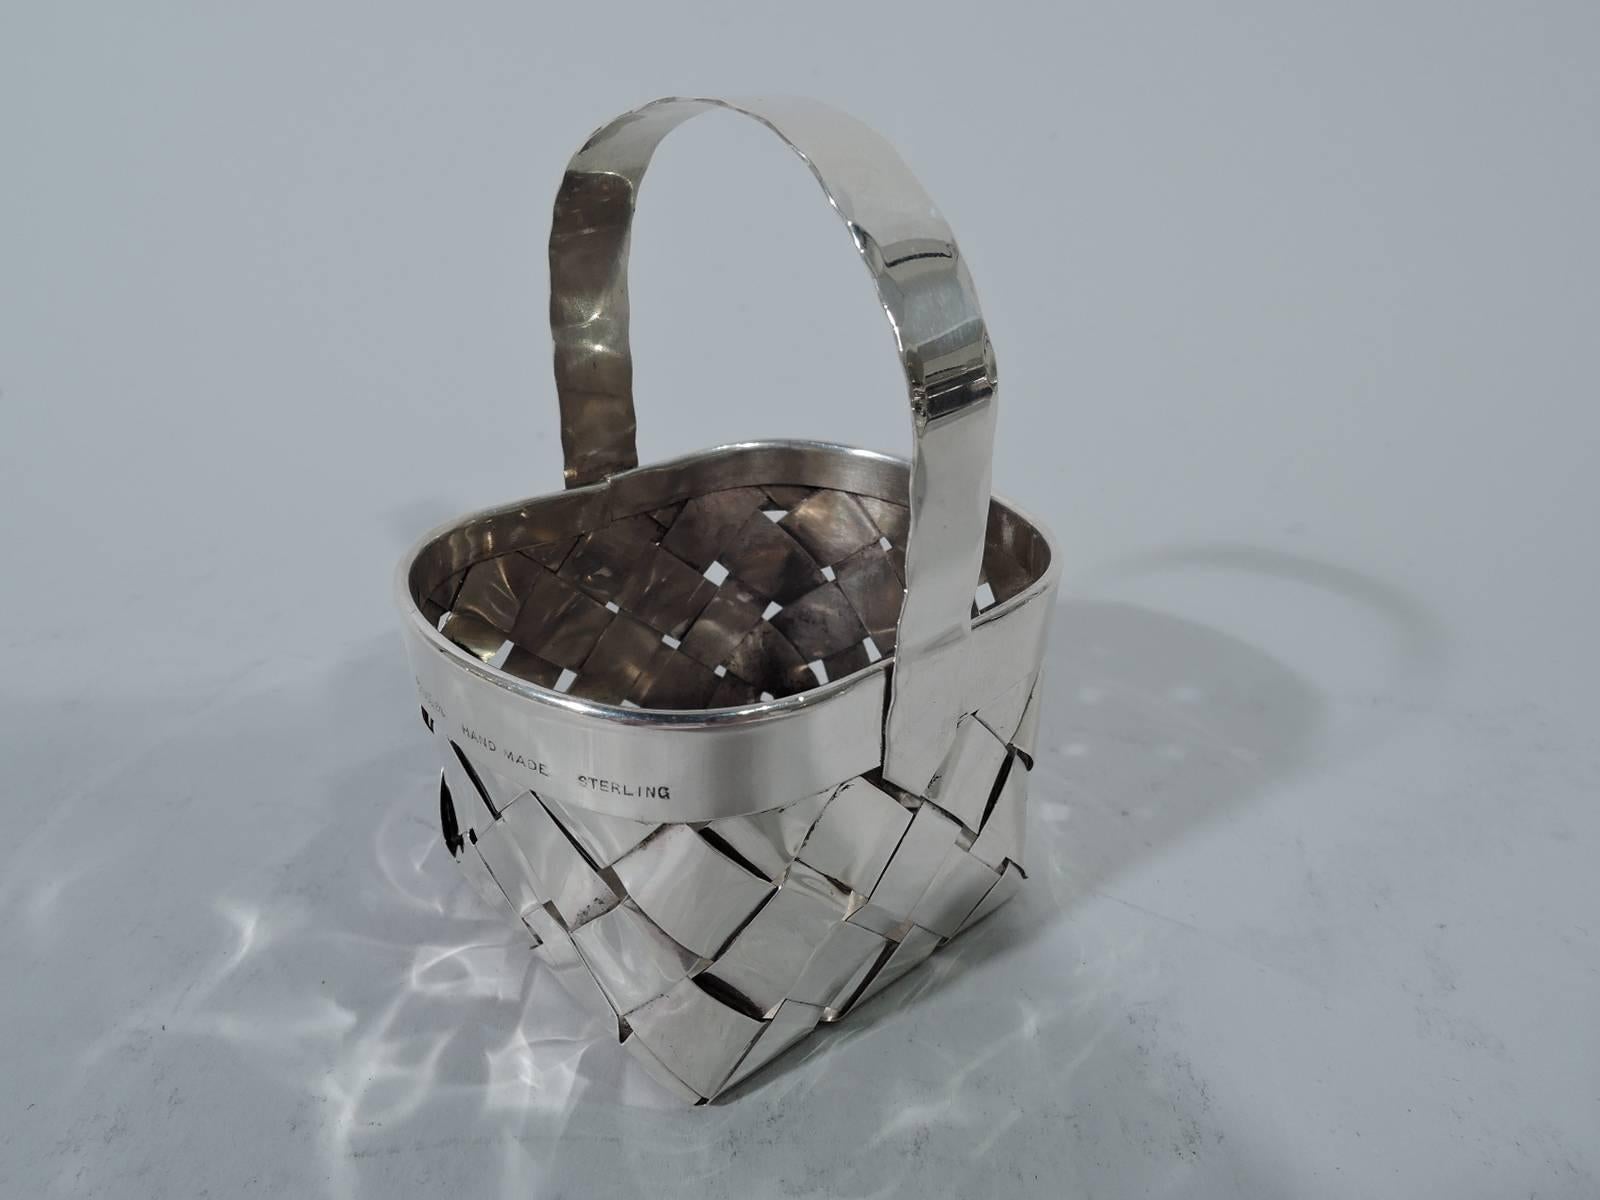 Miniature sterling silver country basket. Retailed by Cartier in New York. Woven sides and bottom, plain rim, and C-scroll handle with faint crimping suggestive of stitching. A witty mix of high and low. Hallmark includes phrase “Hand Made”. Weight: